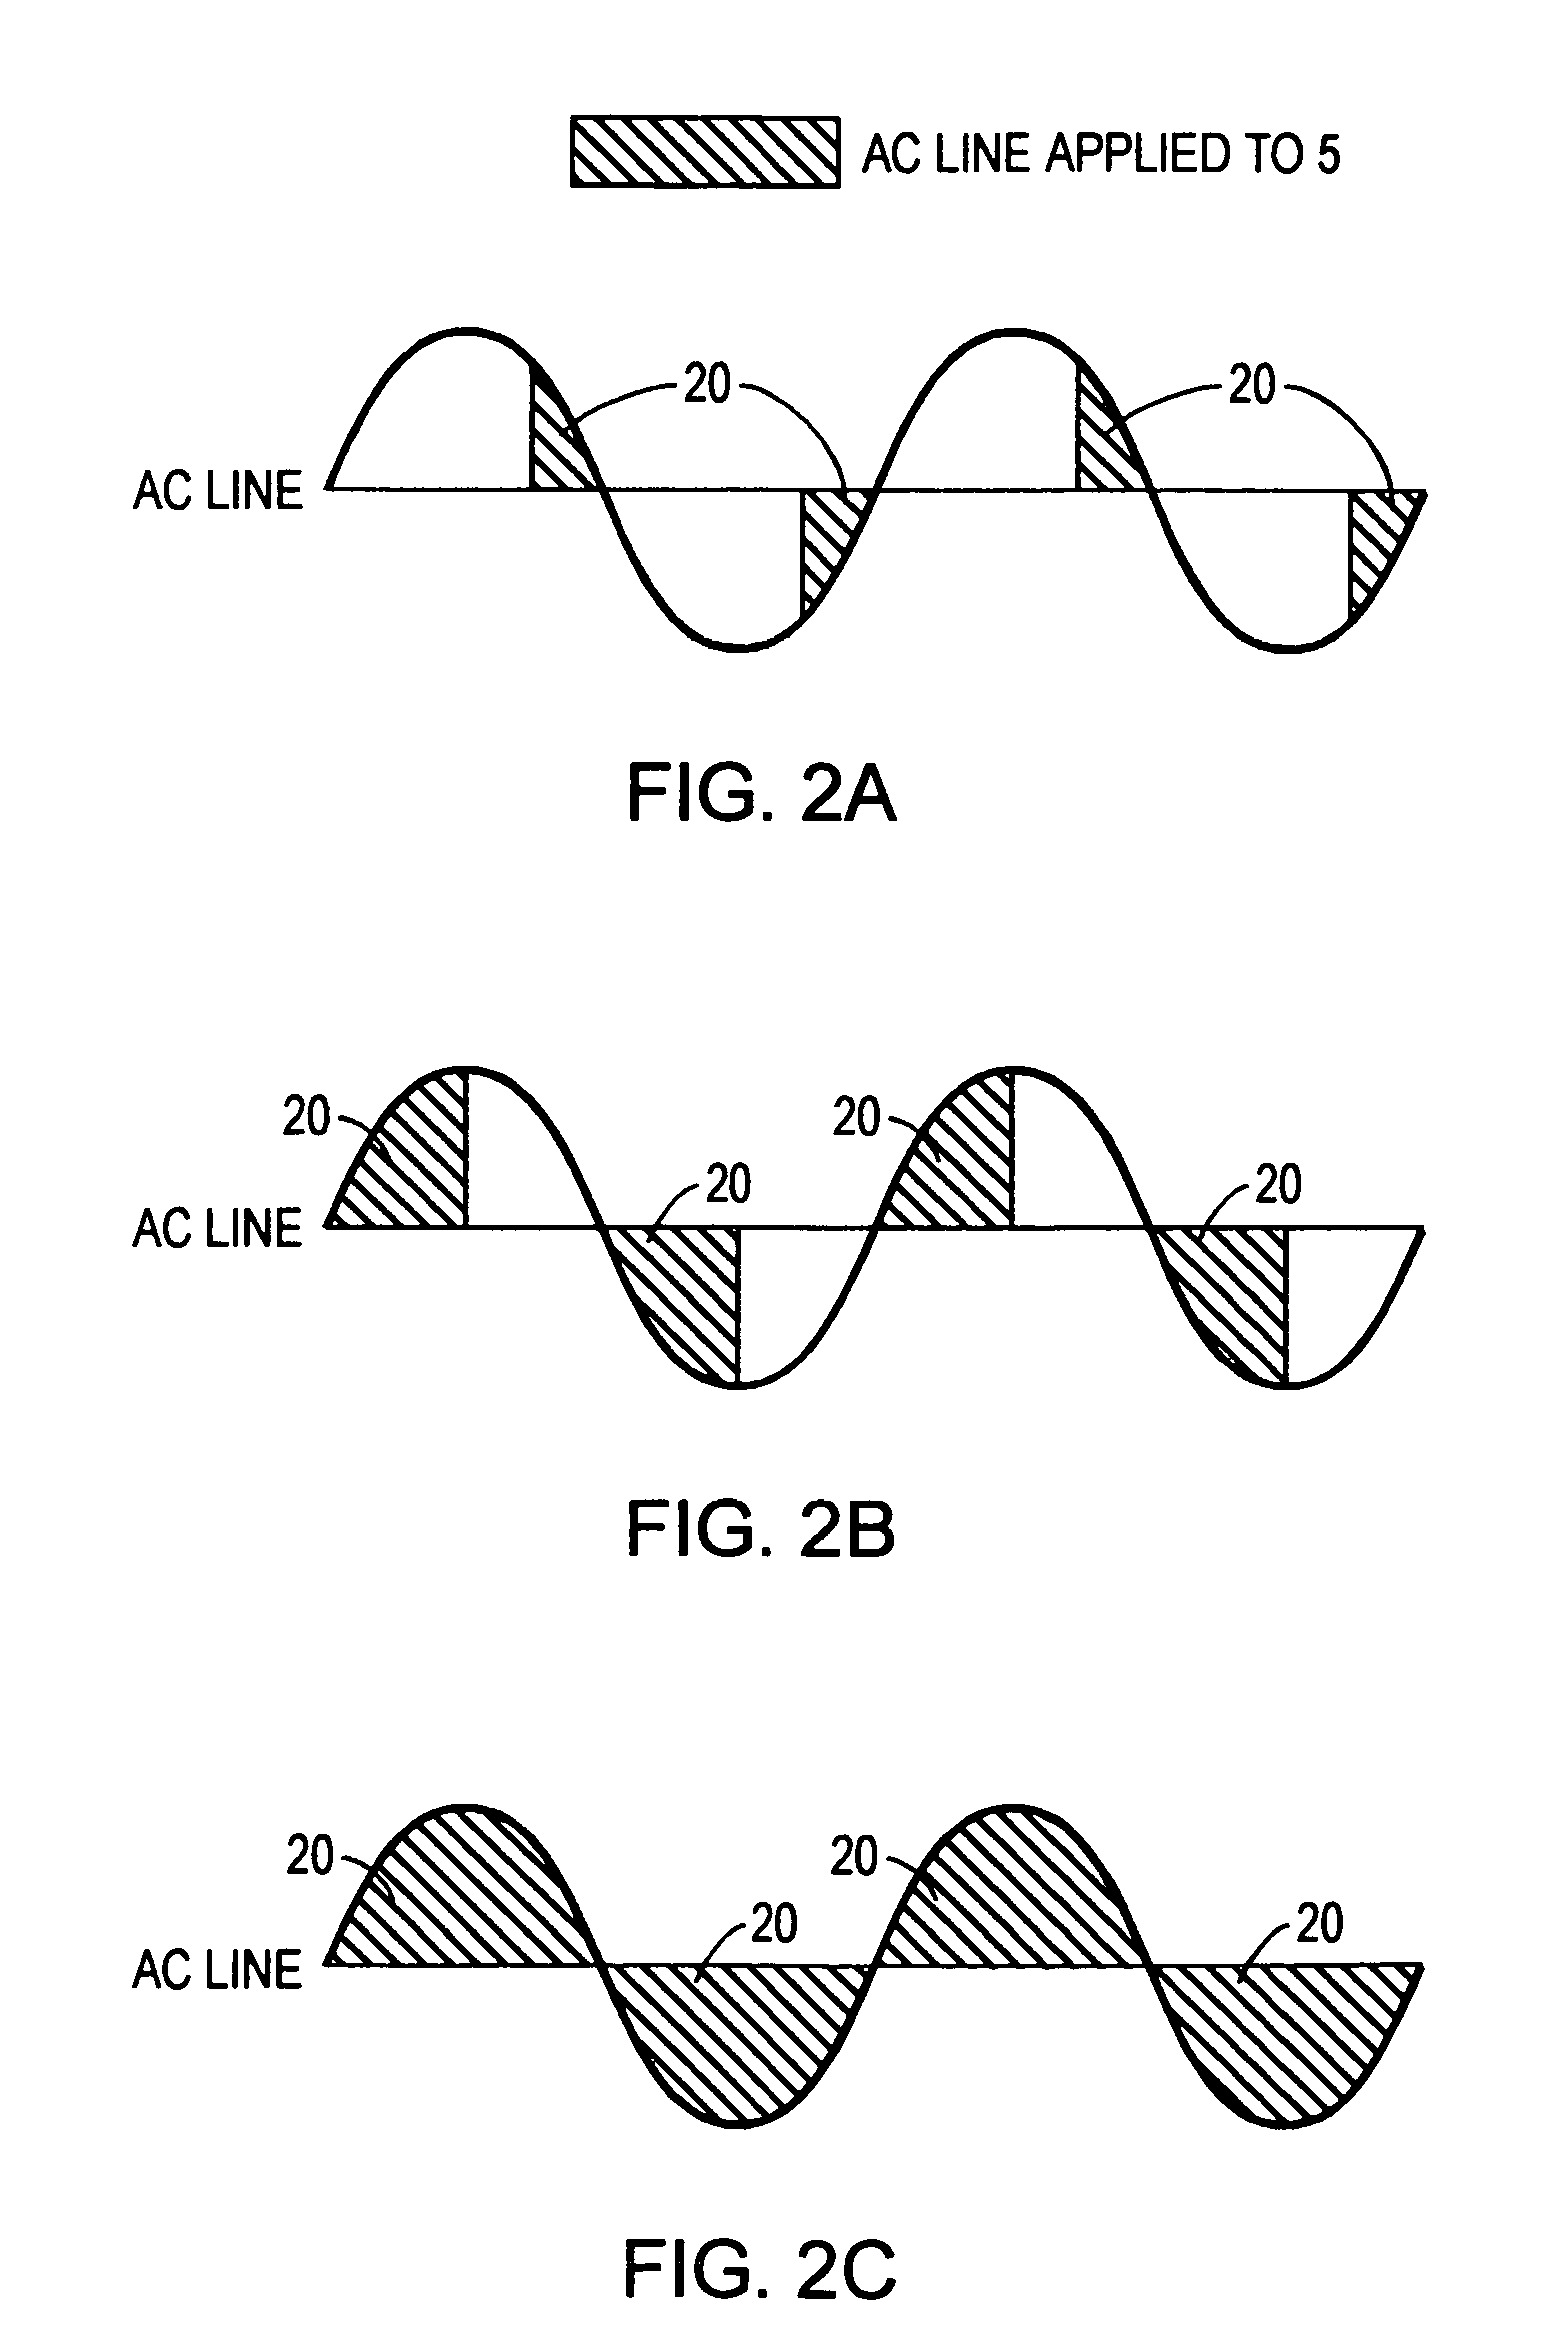 Incandescent light power controller with predetermined off-state impedance